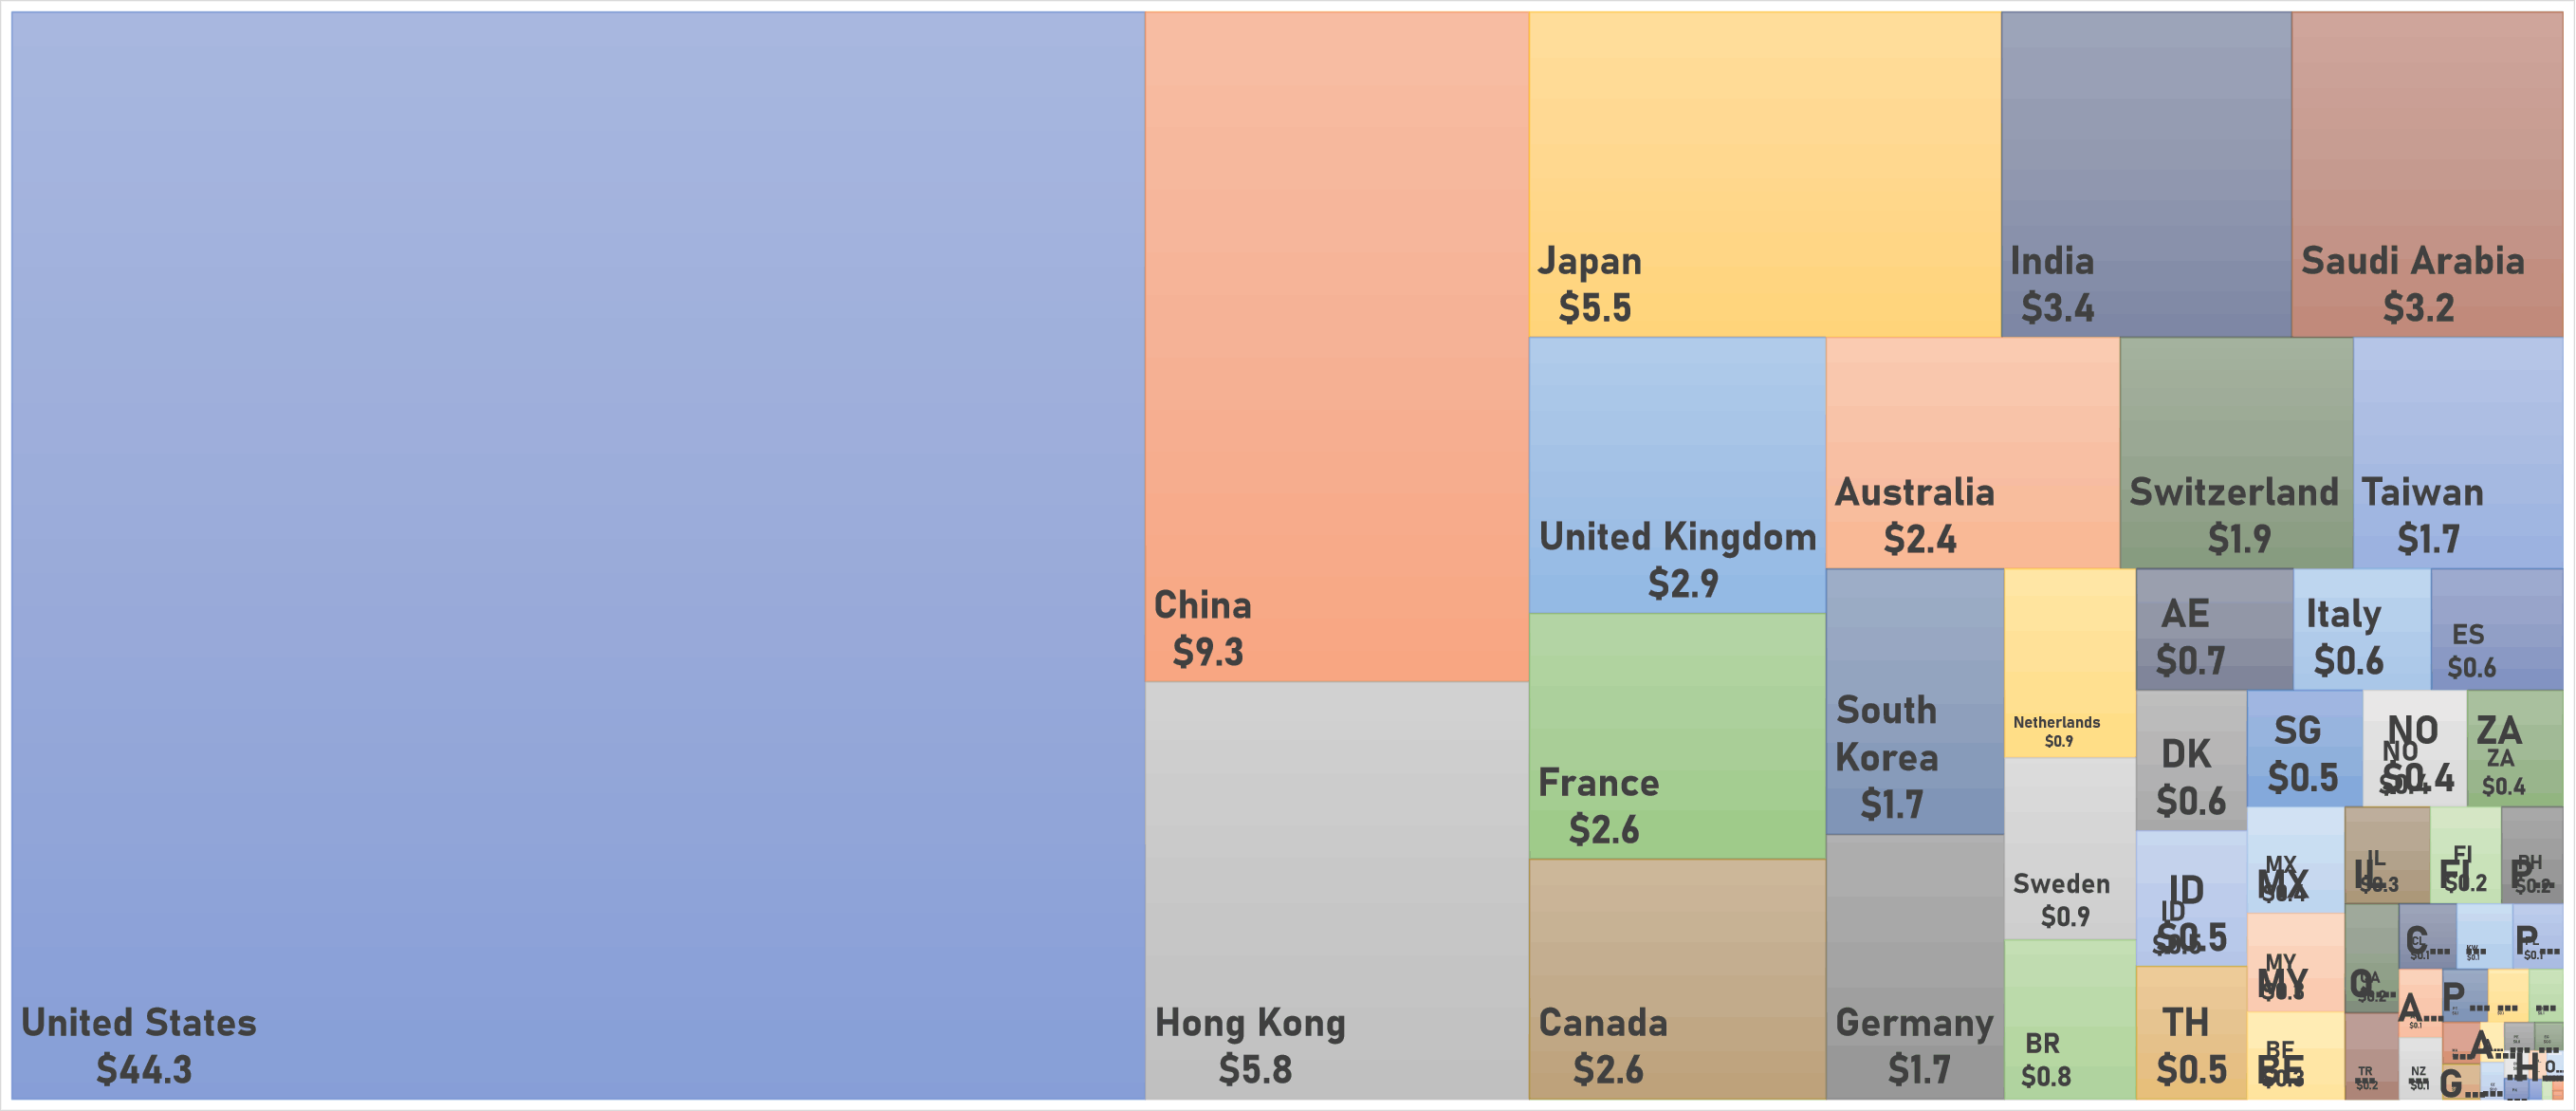 World market Capitalization by country (US$ Trillion) | Sources: phipost.com, FactSet data 